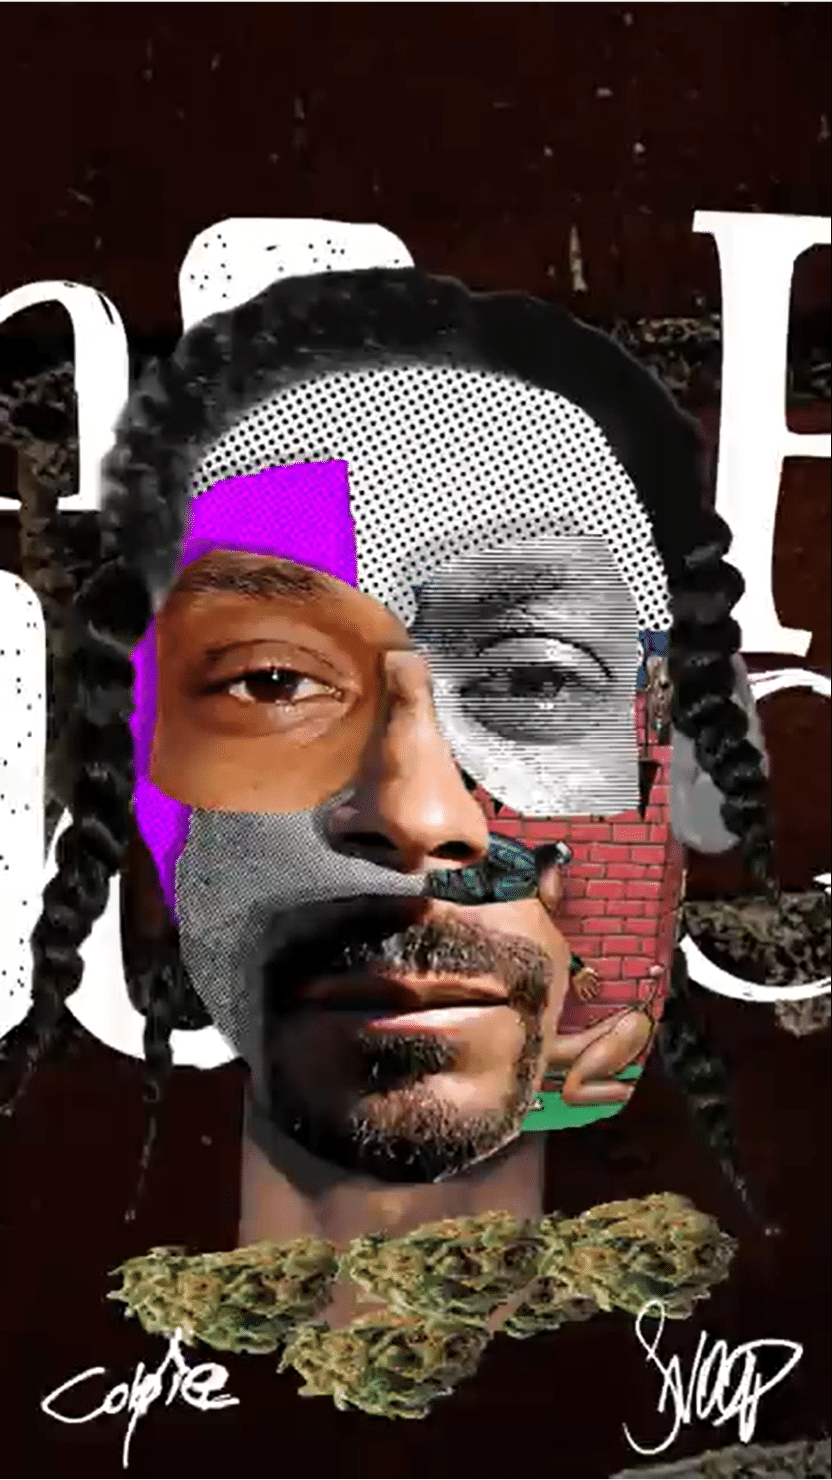 image of snoop dogg that will feature in the NFT